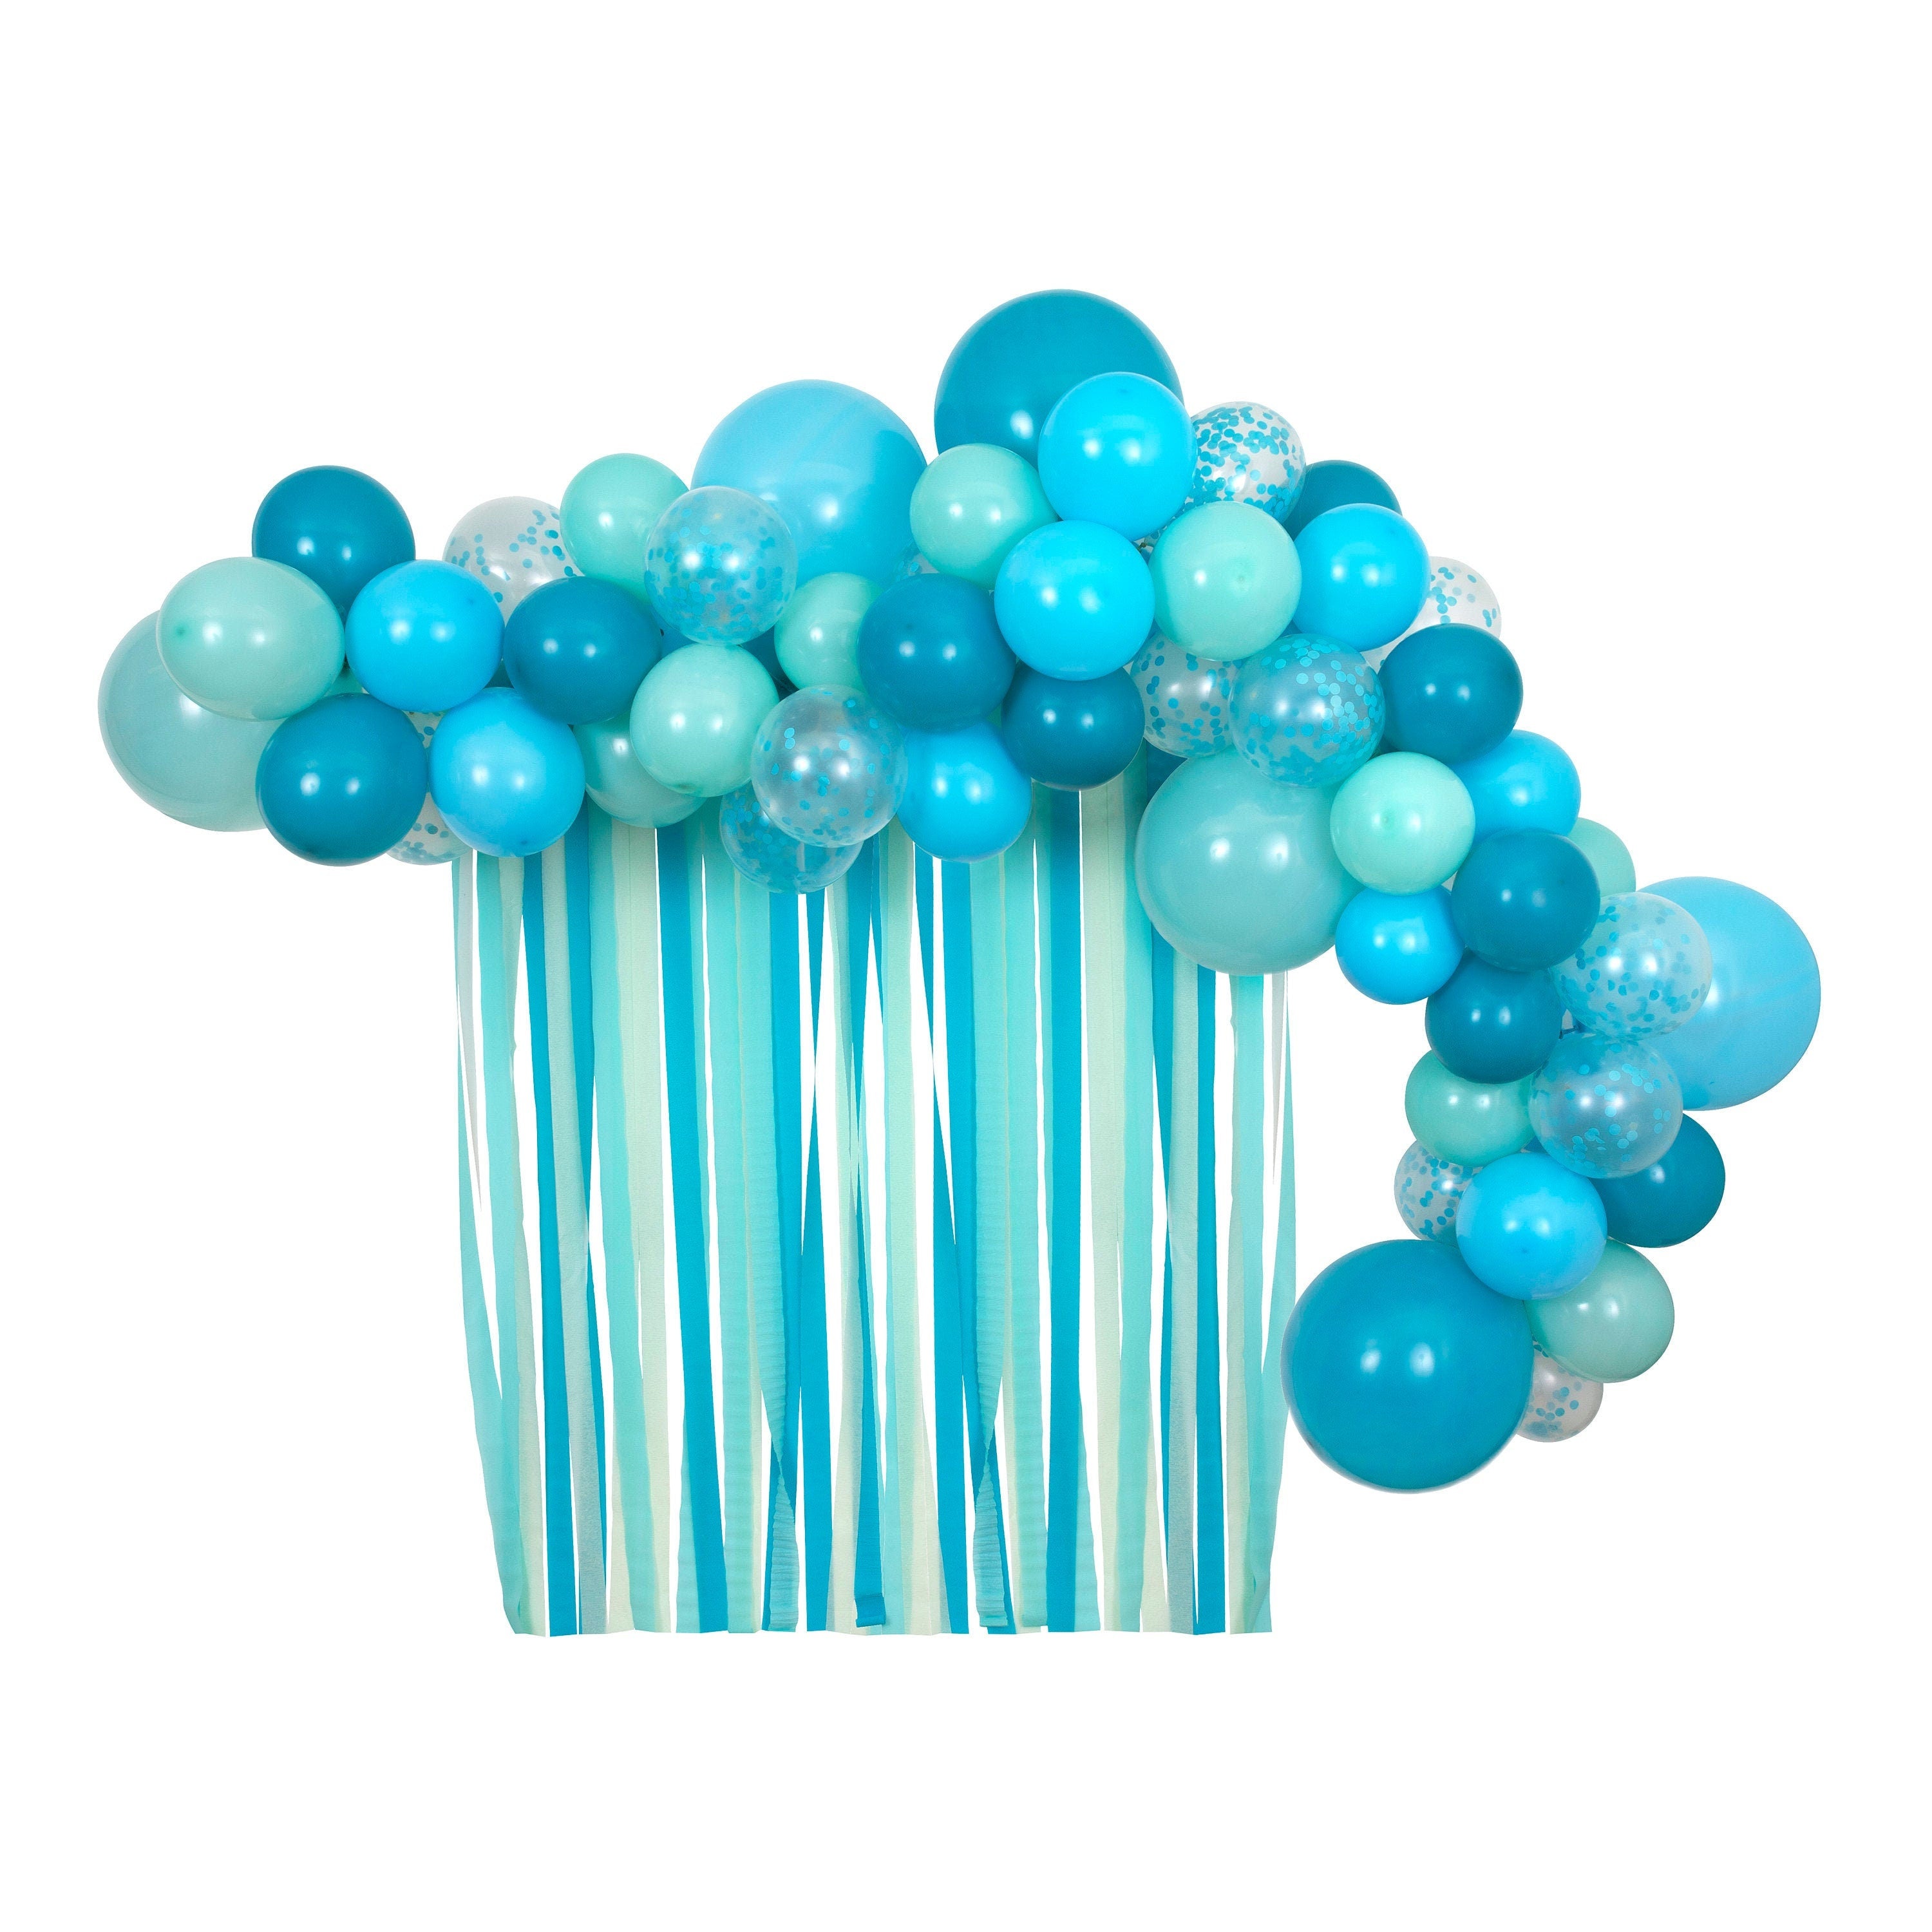 Balloon Garland Kit | Blue Party Decorations - Blue Baby Shower Decor - Birthday Party Backdrop - Mermaid Birthday - Balloon Backdrop